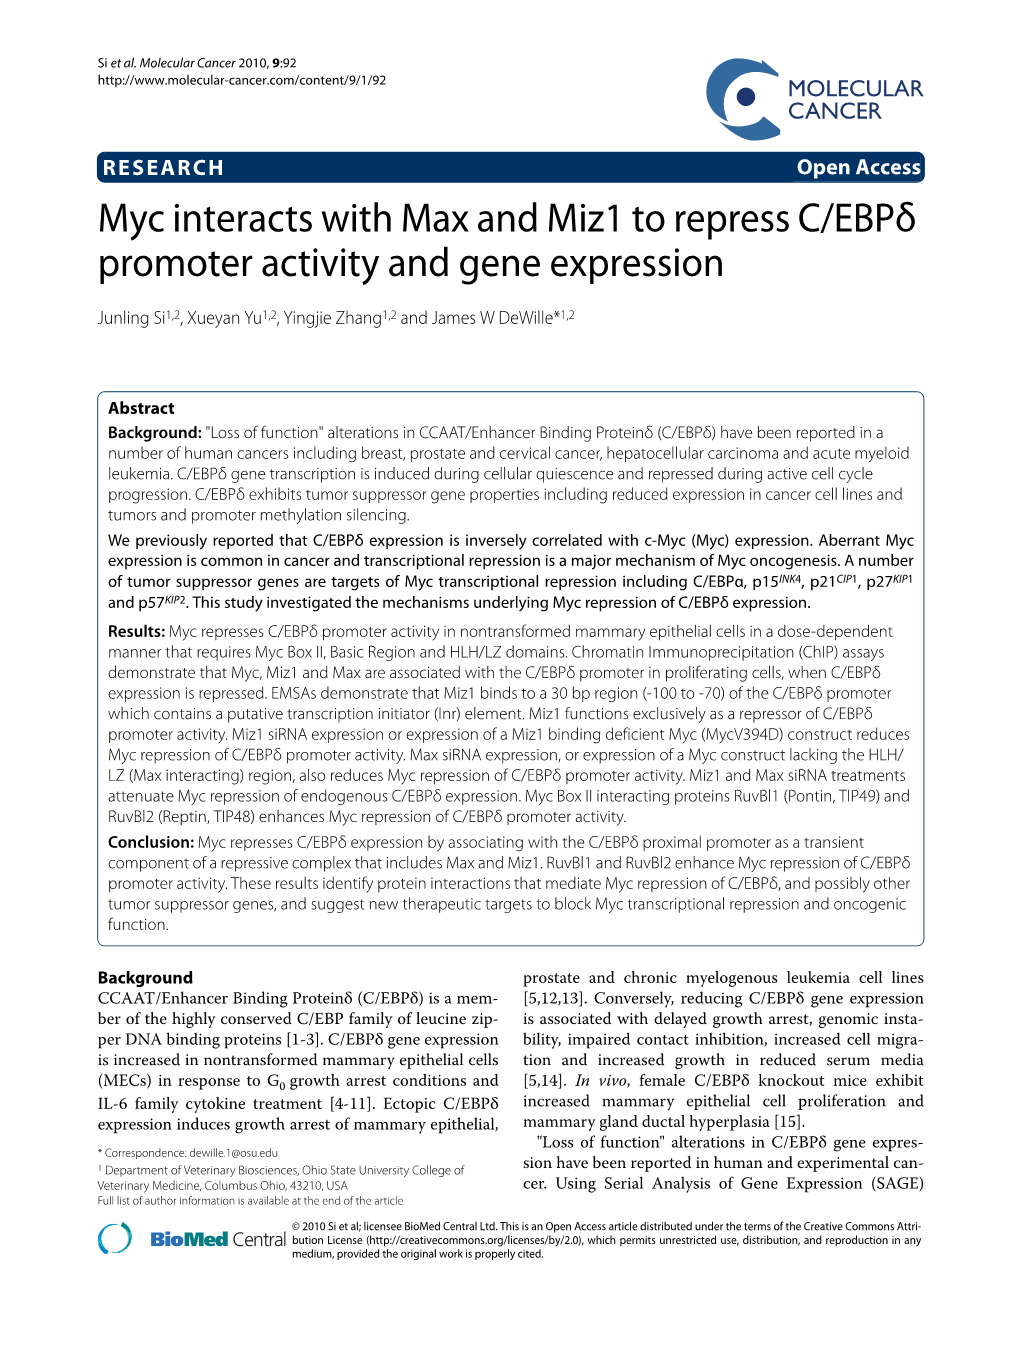 Myc Interacts with Max and Miz1 to Repress C/Ebpδ Promoter Activity and Gene Expression